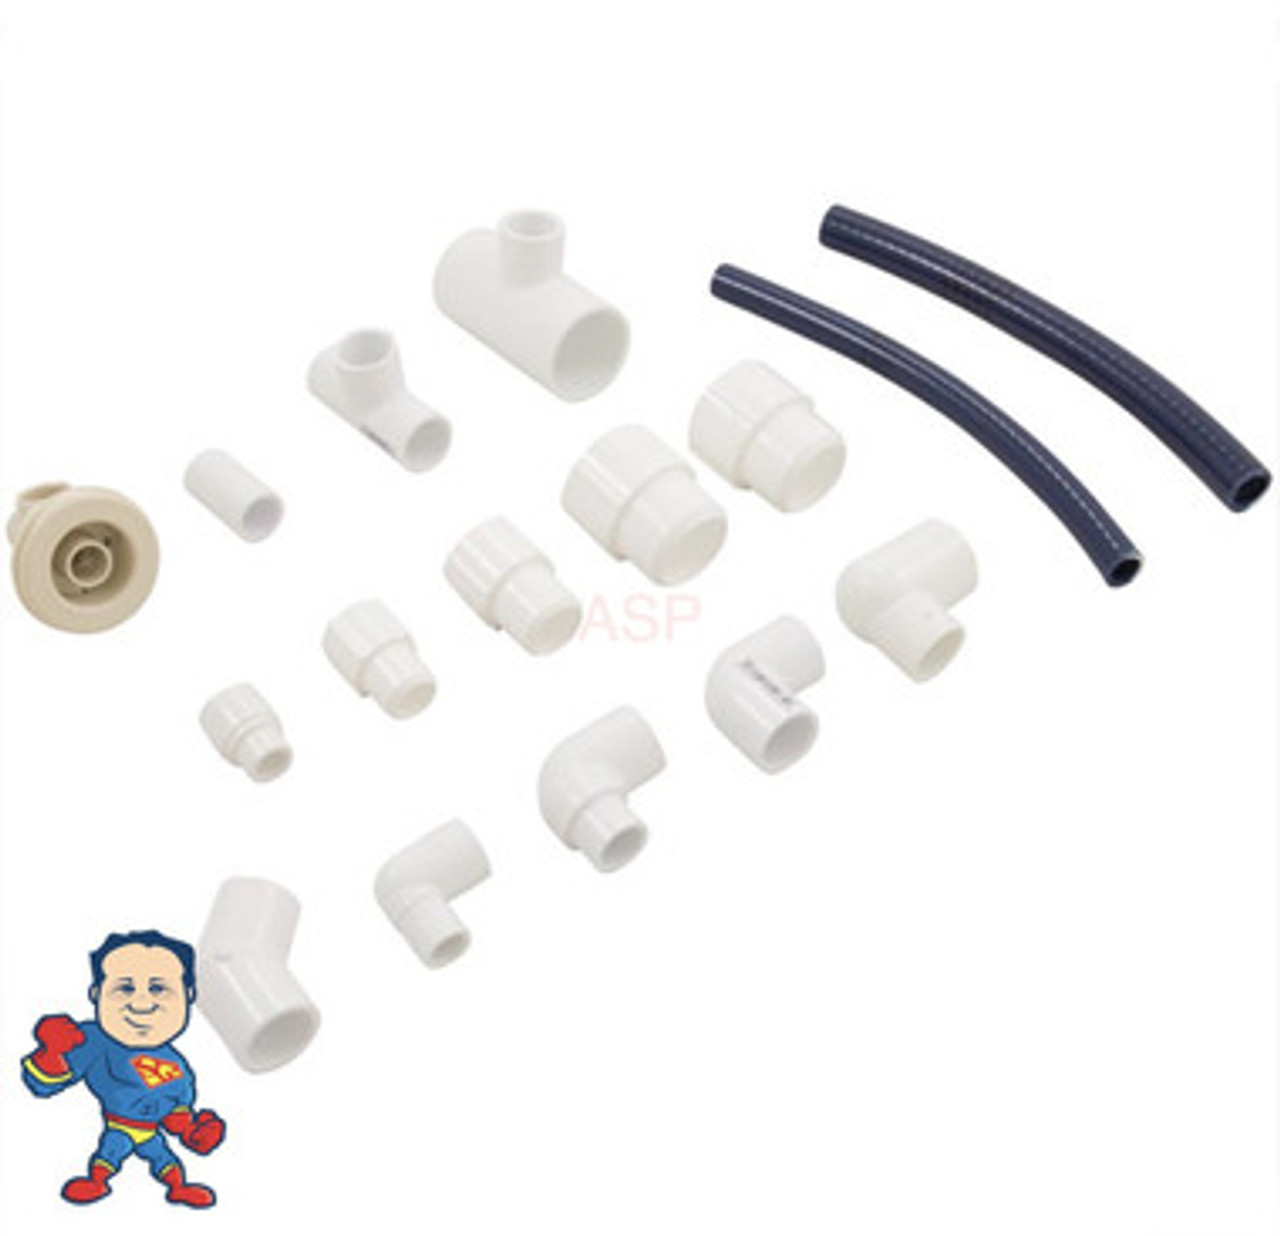 Jacuzzi Whirlpool BMH, 2" hole size, Directional, Smooth, Almond, Retrofit Kit